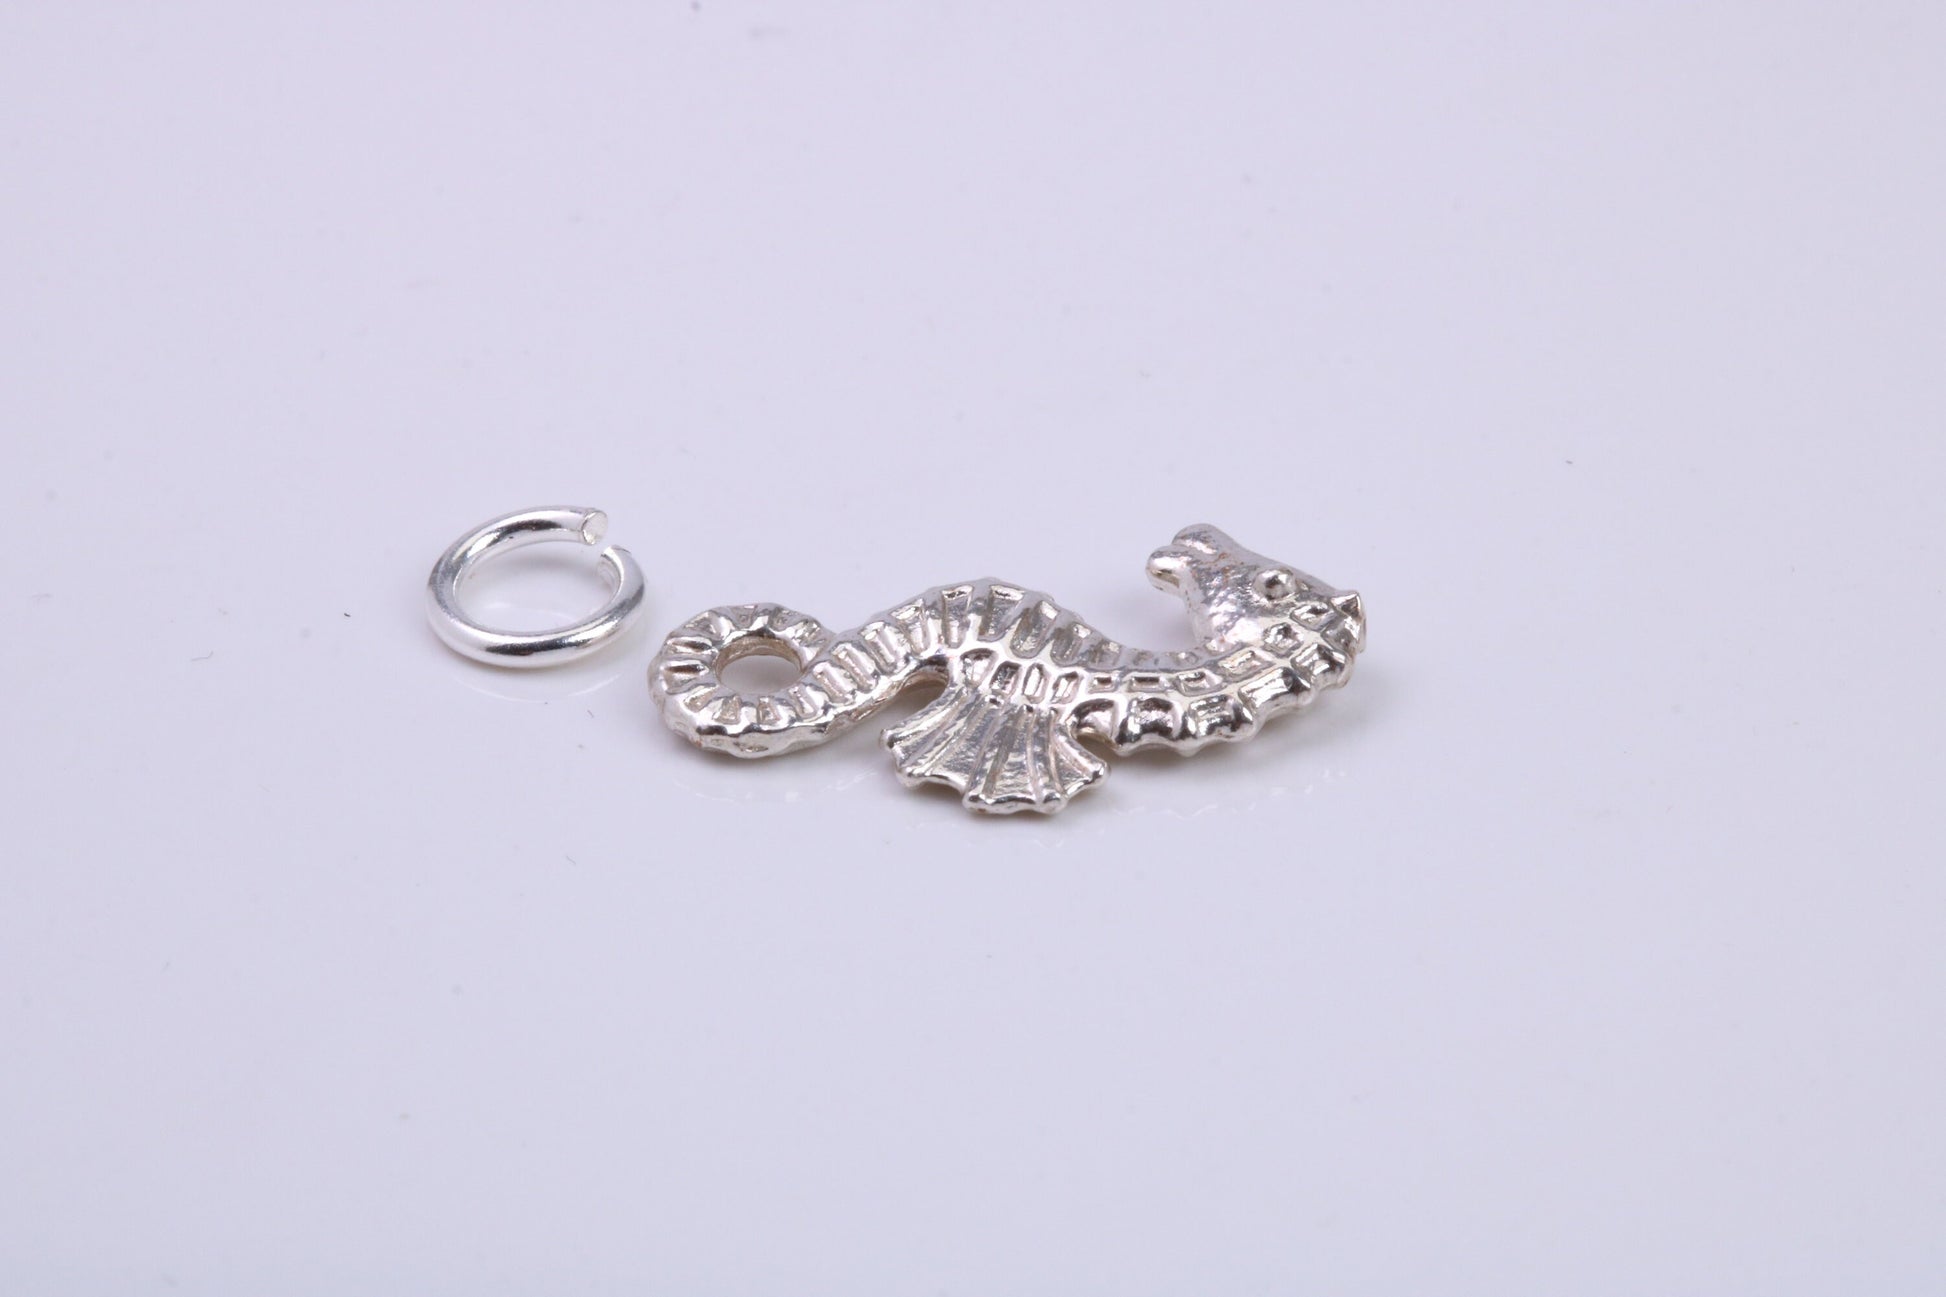 Sea Horse Charm, Traditional Charm, Made from Solid 925 Grade Sterling Silver, Complete with Attachment Link